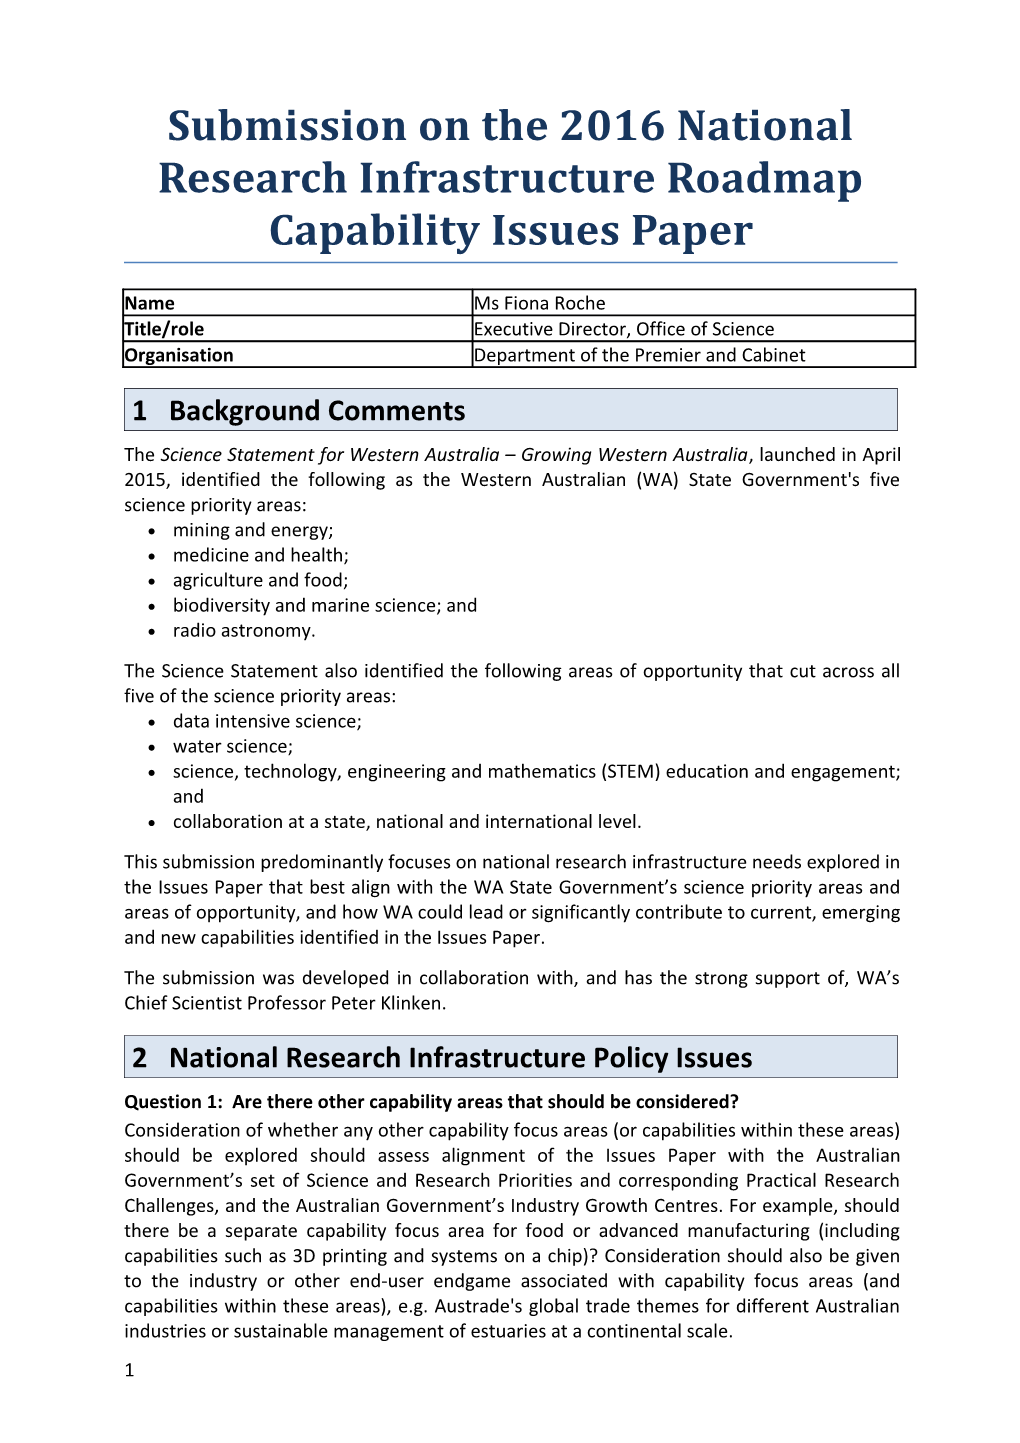 Submission on The2016 National Research Infrastructure Roadmap Capabilityissues Paper